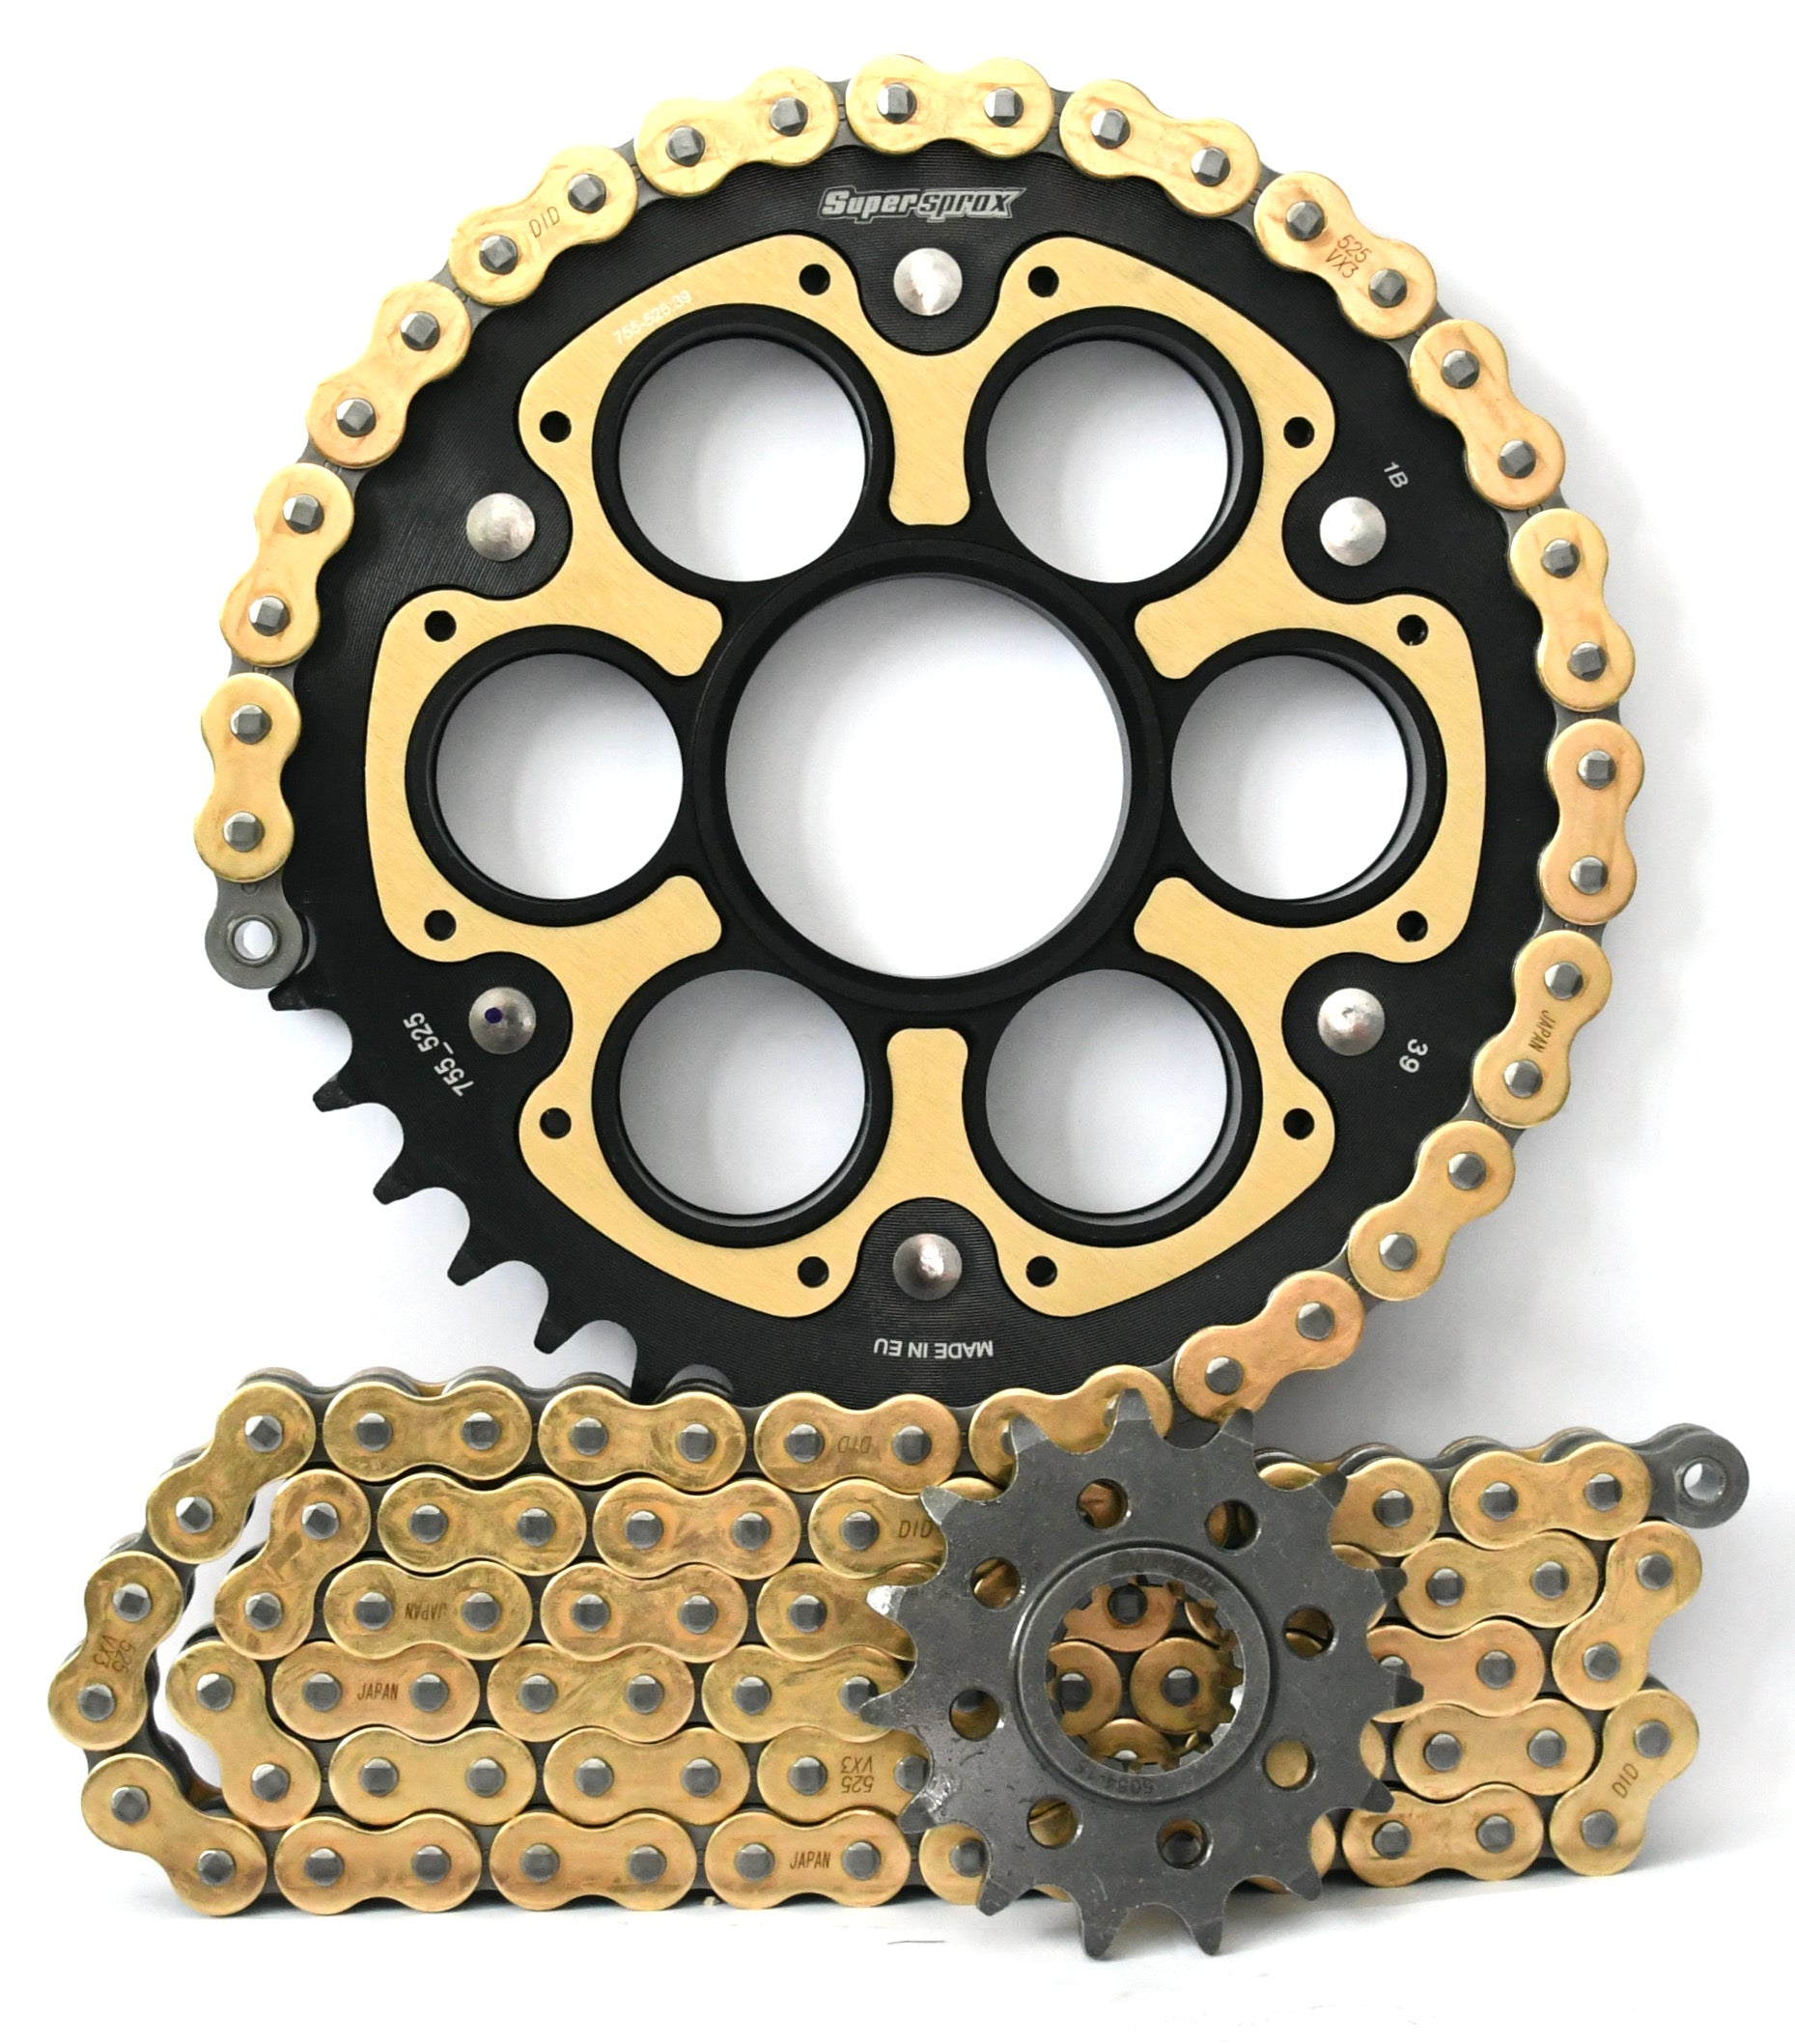 Supersprox Chain & Sprocket Kit 520 Conversion for Ducati Panigale V4 and V4S - Standard Gearing